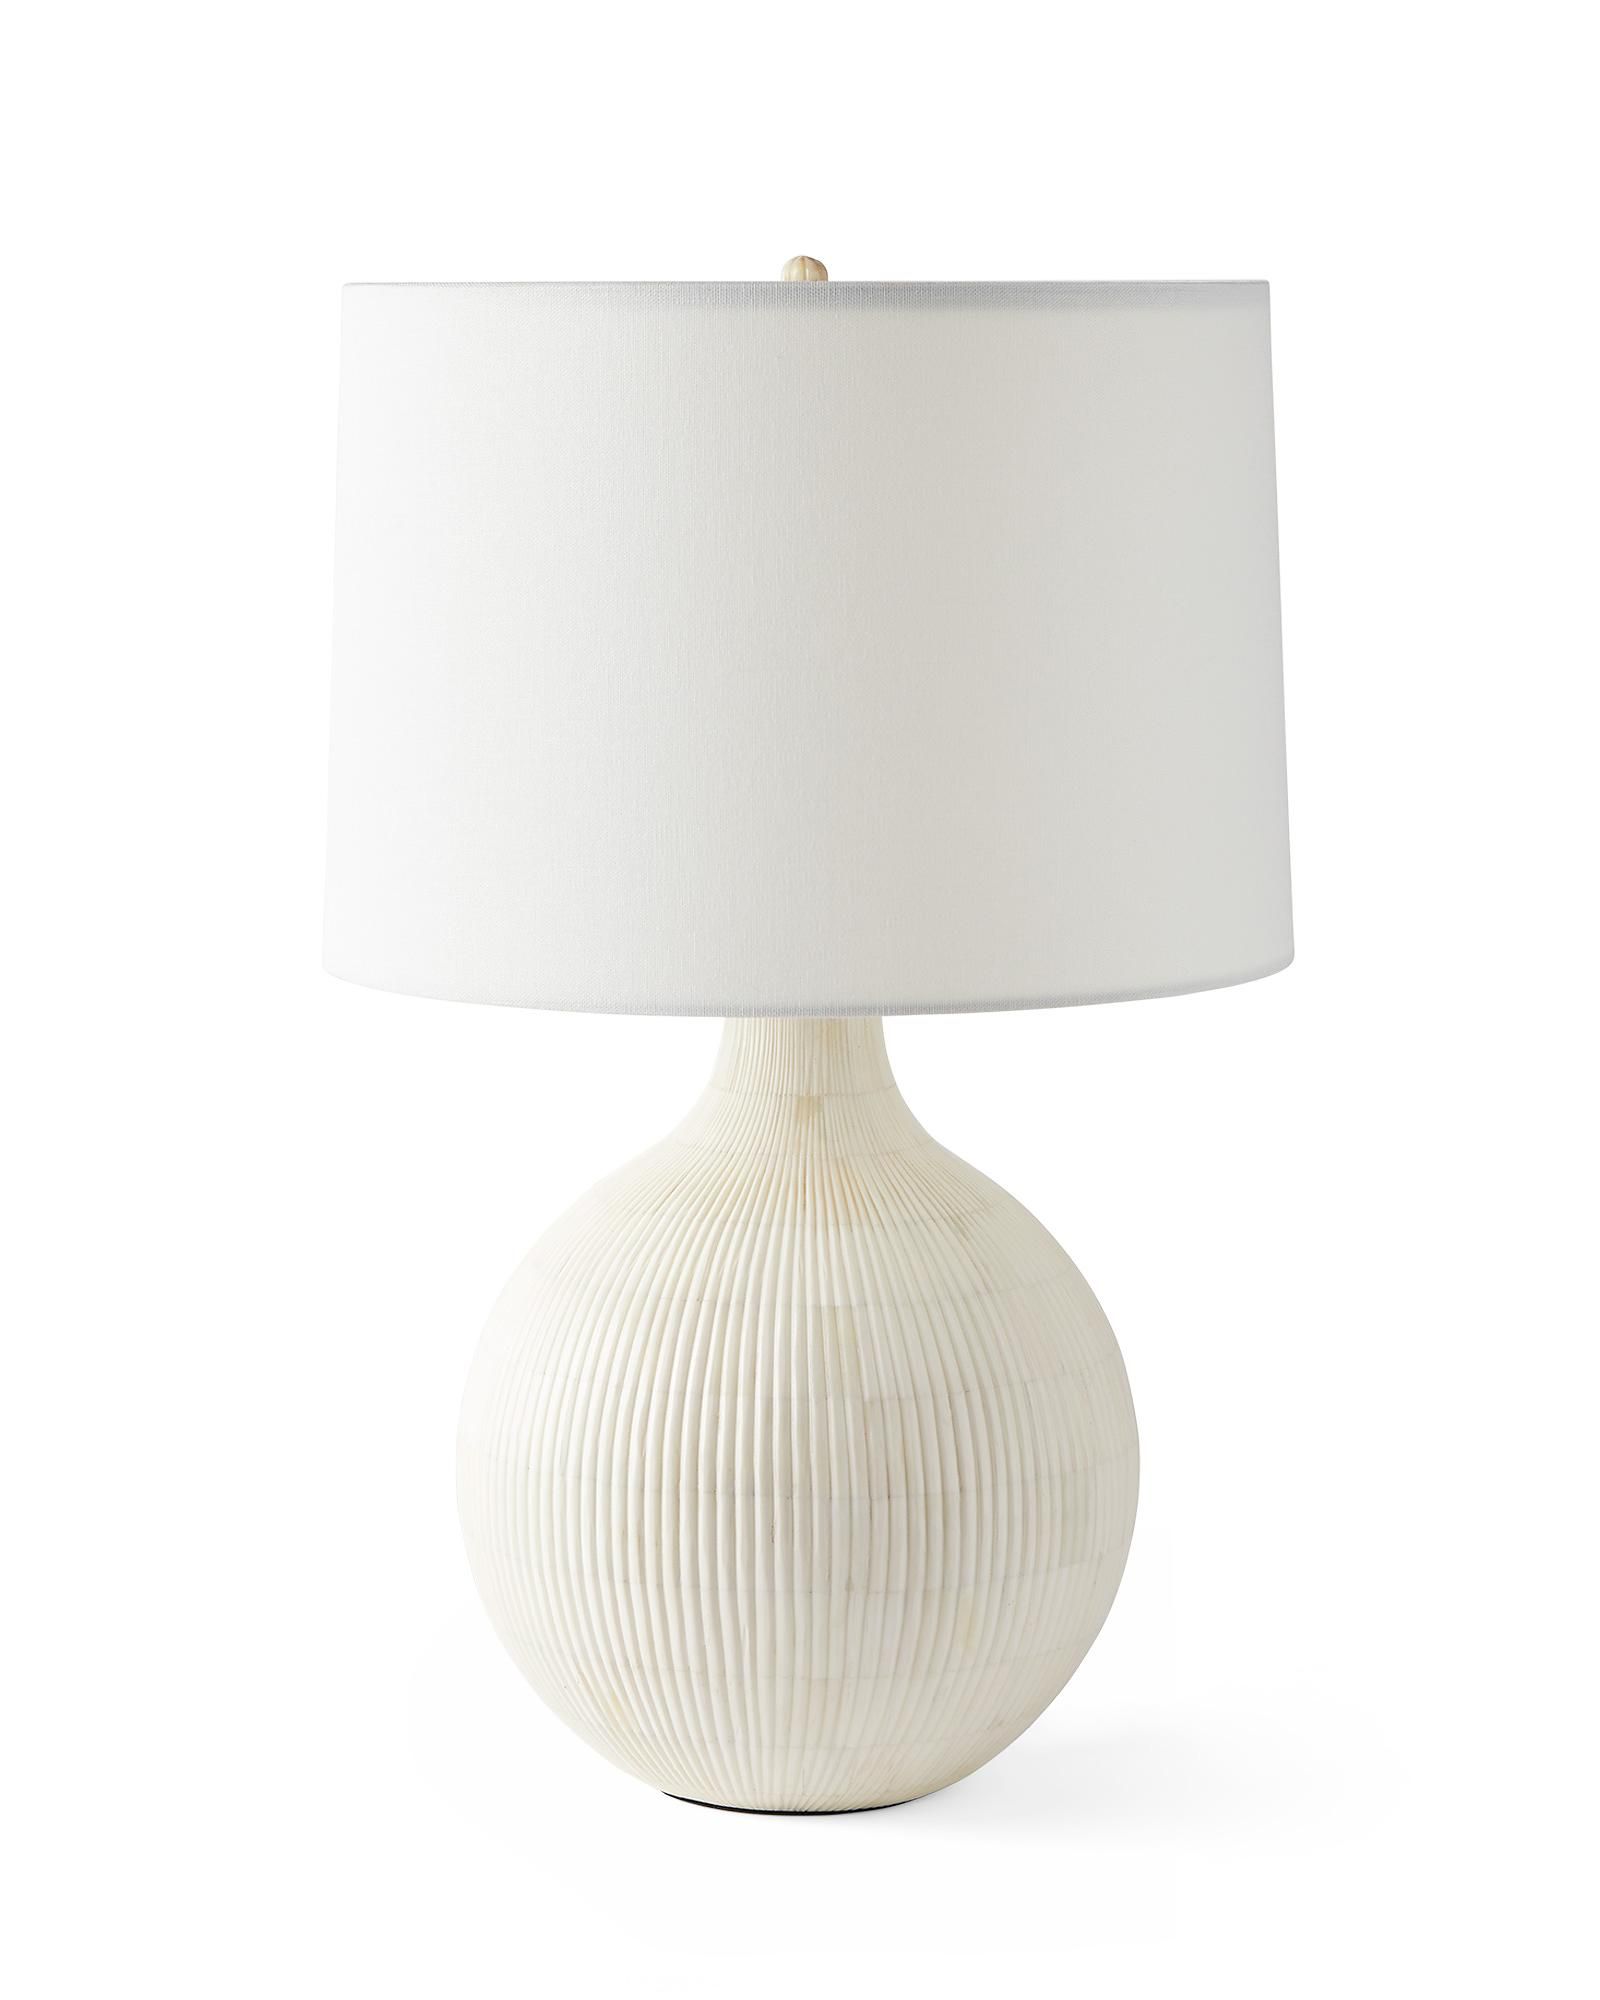 Irving Bone Inlay Table Lamp | Serena and Lily